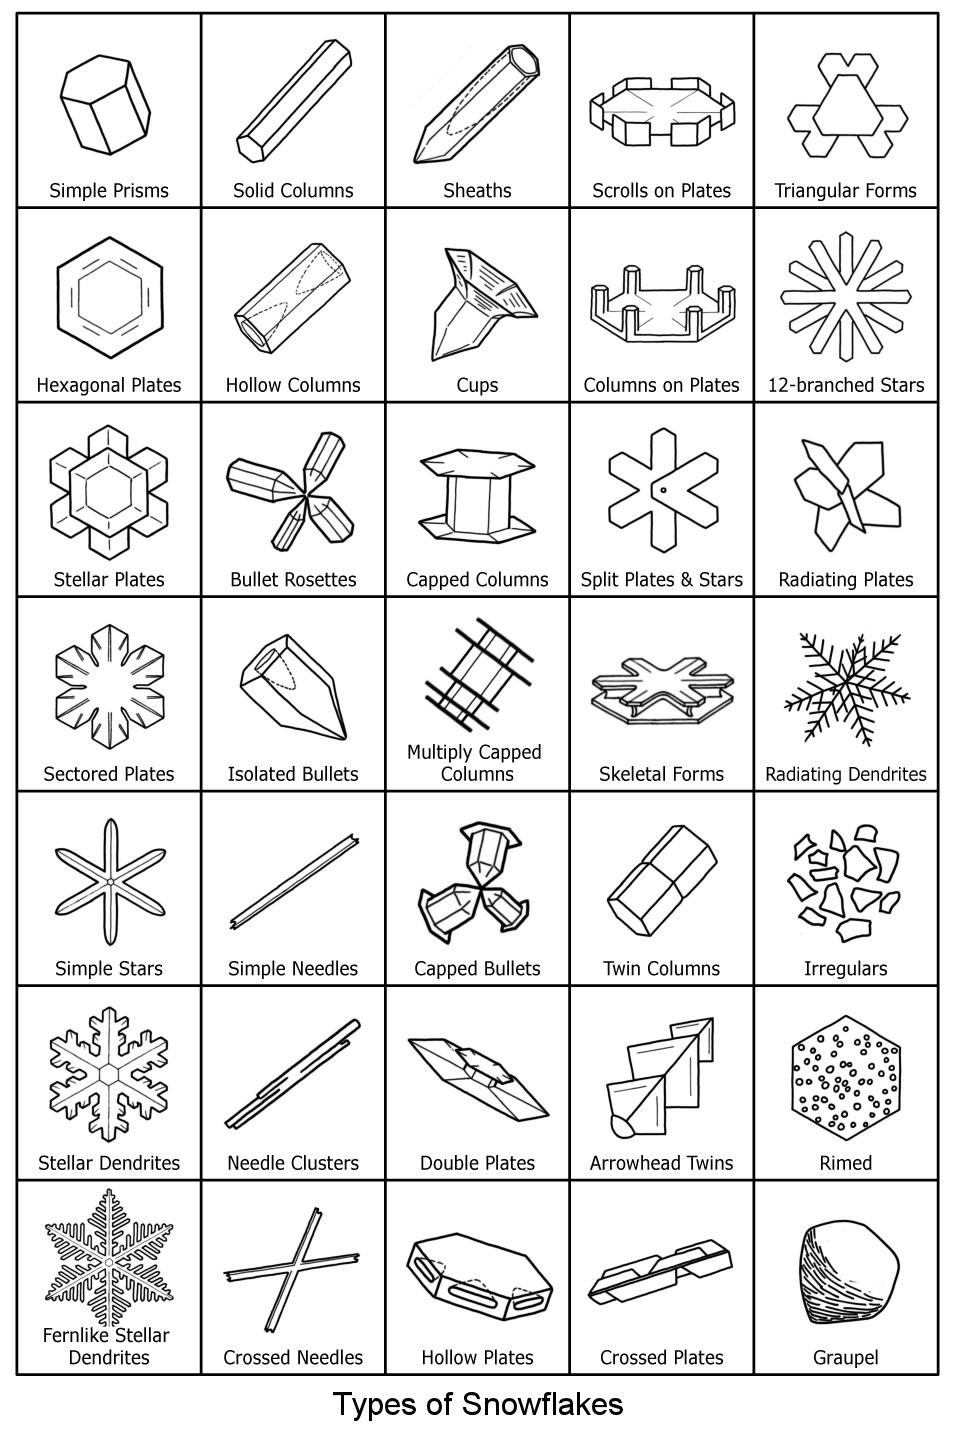 Fun Facts About Snowflakes - And All There Is To Know About SnowHow To Make  Science Projects For Kids